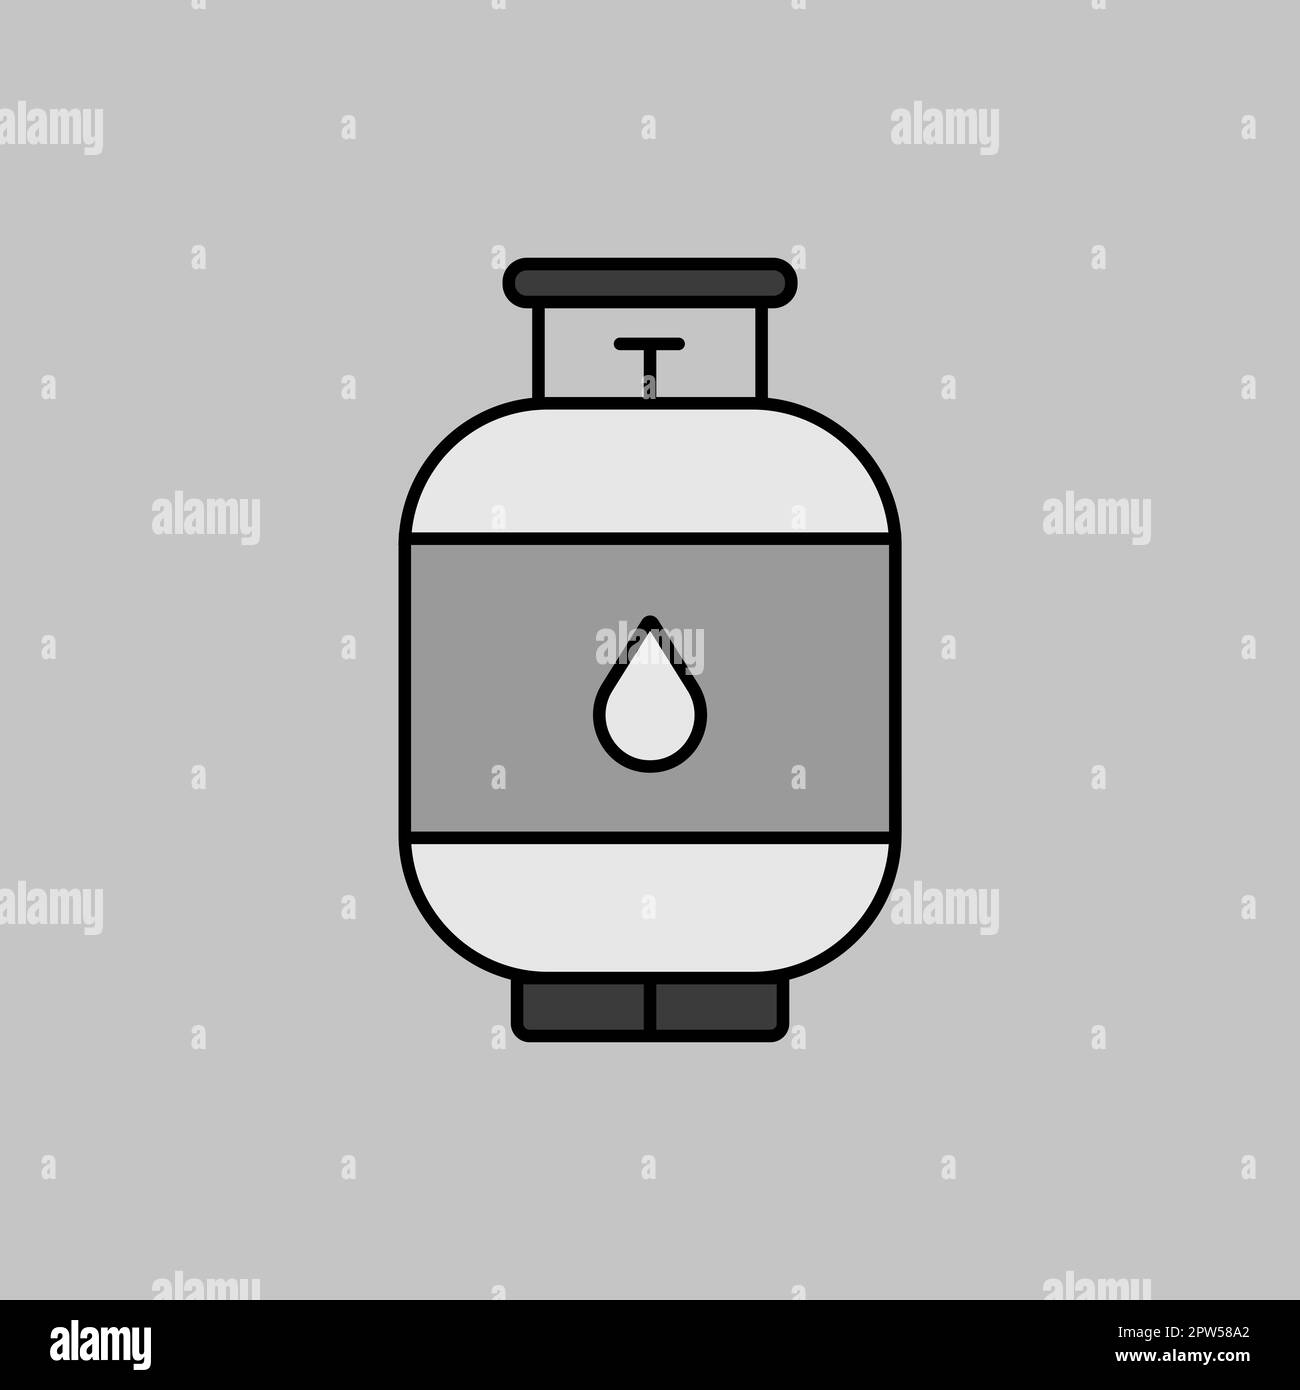 gas cylinder clipart black and white tree